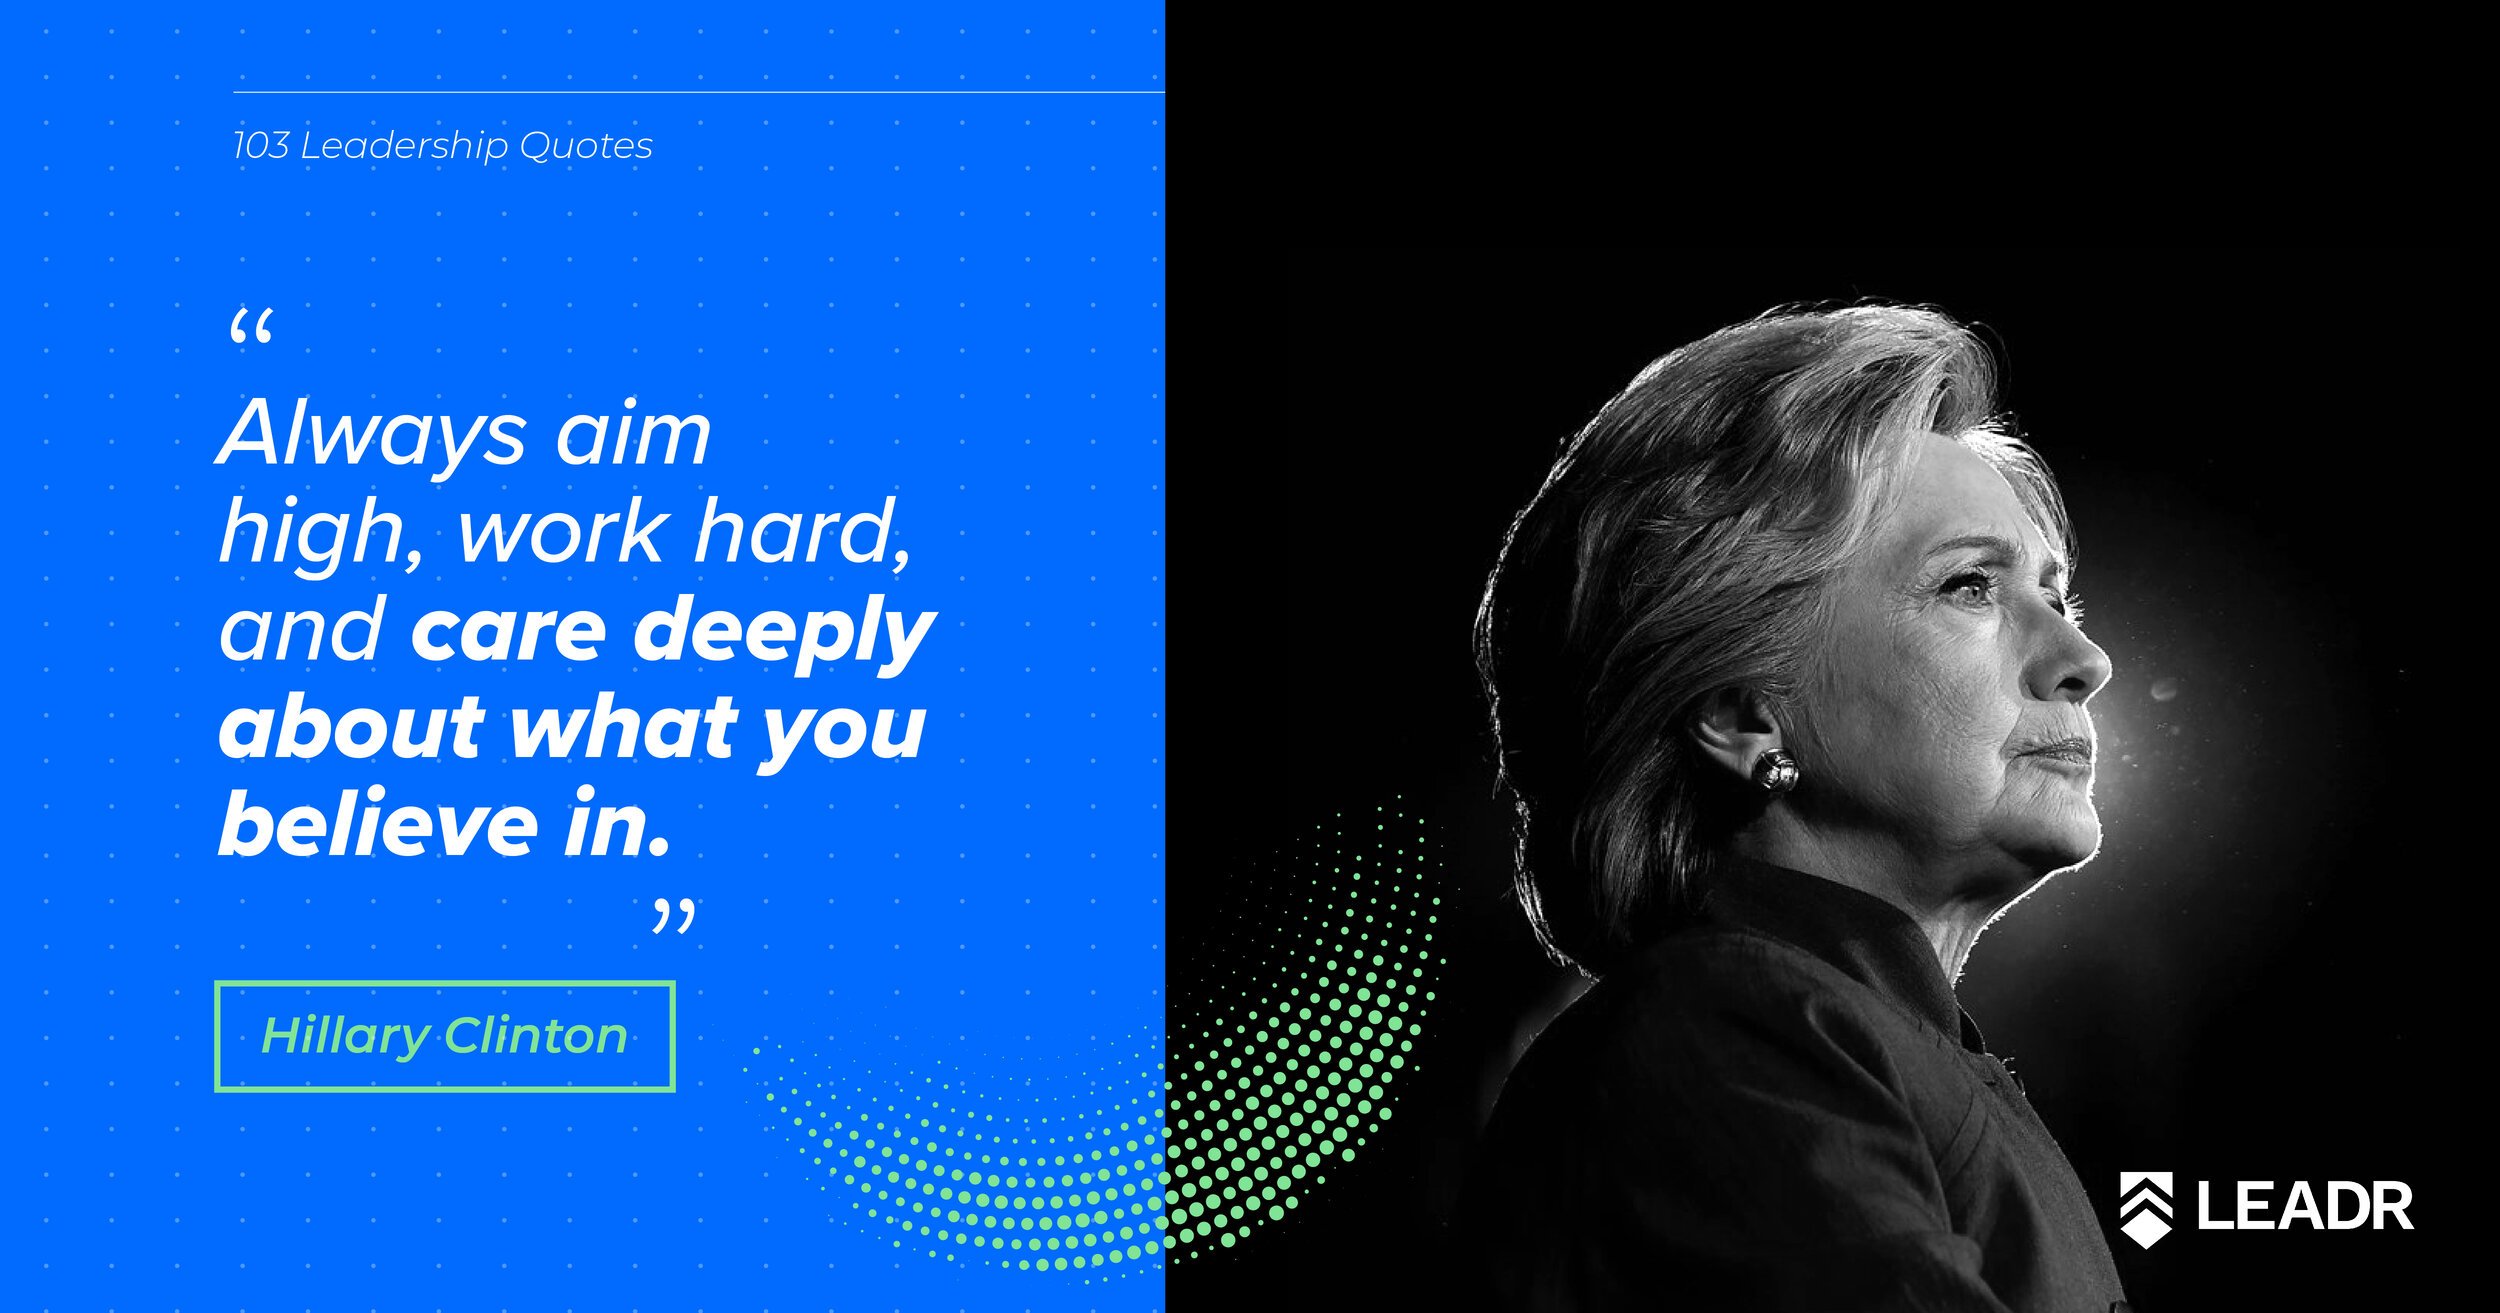 Royalty free downloadable leadership quotes - Hillary Clinton